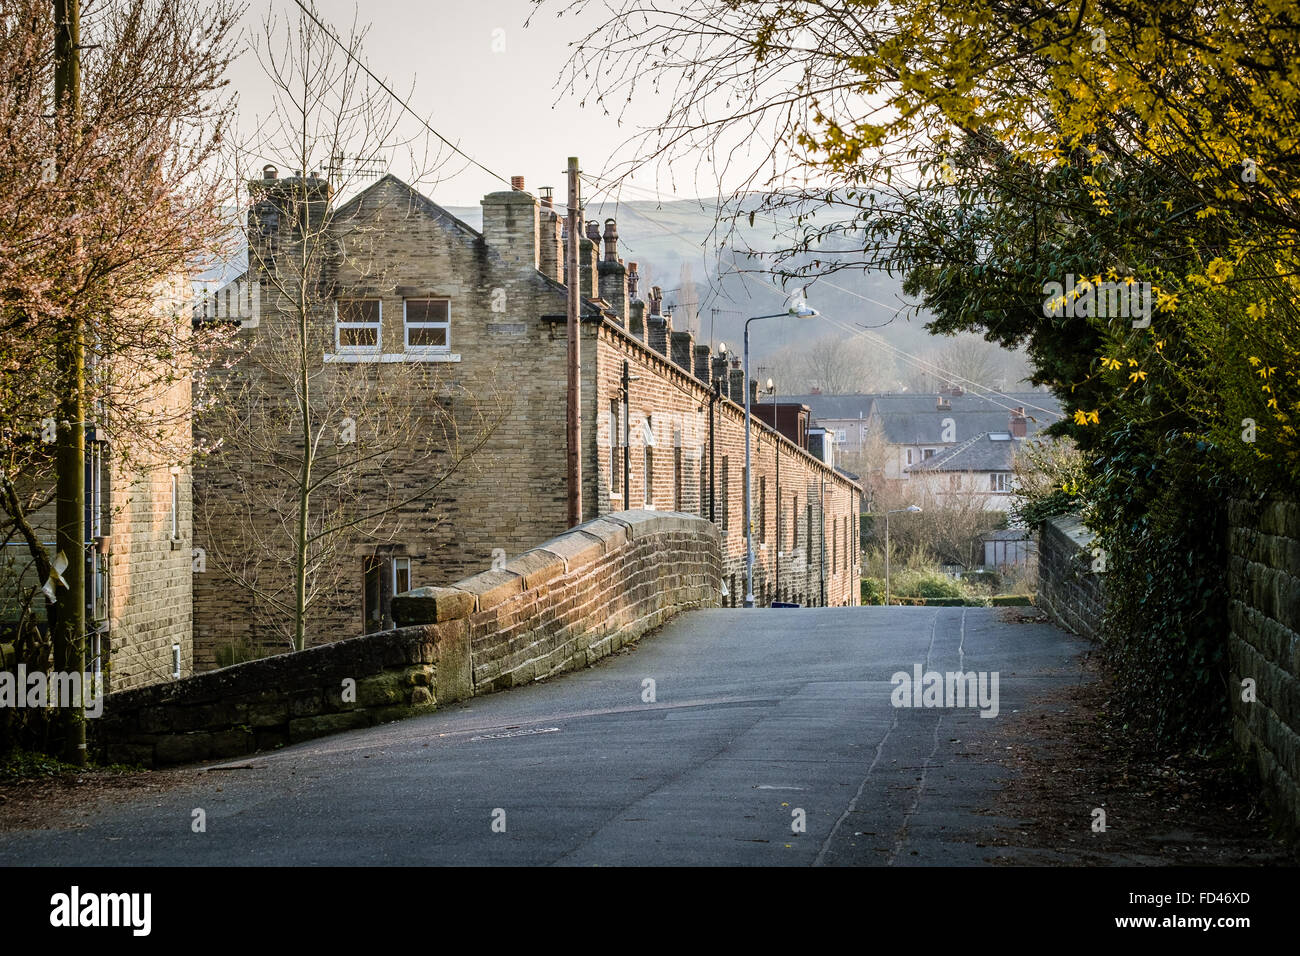 View of terraced houses in the village of Mytholmroyd in West Yorkshire, England Stock Photo